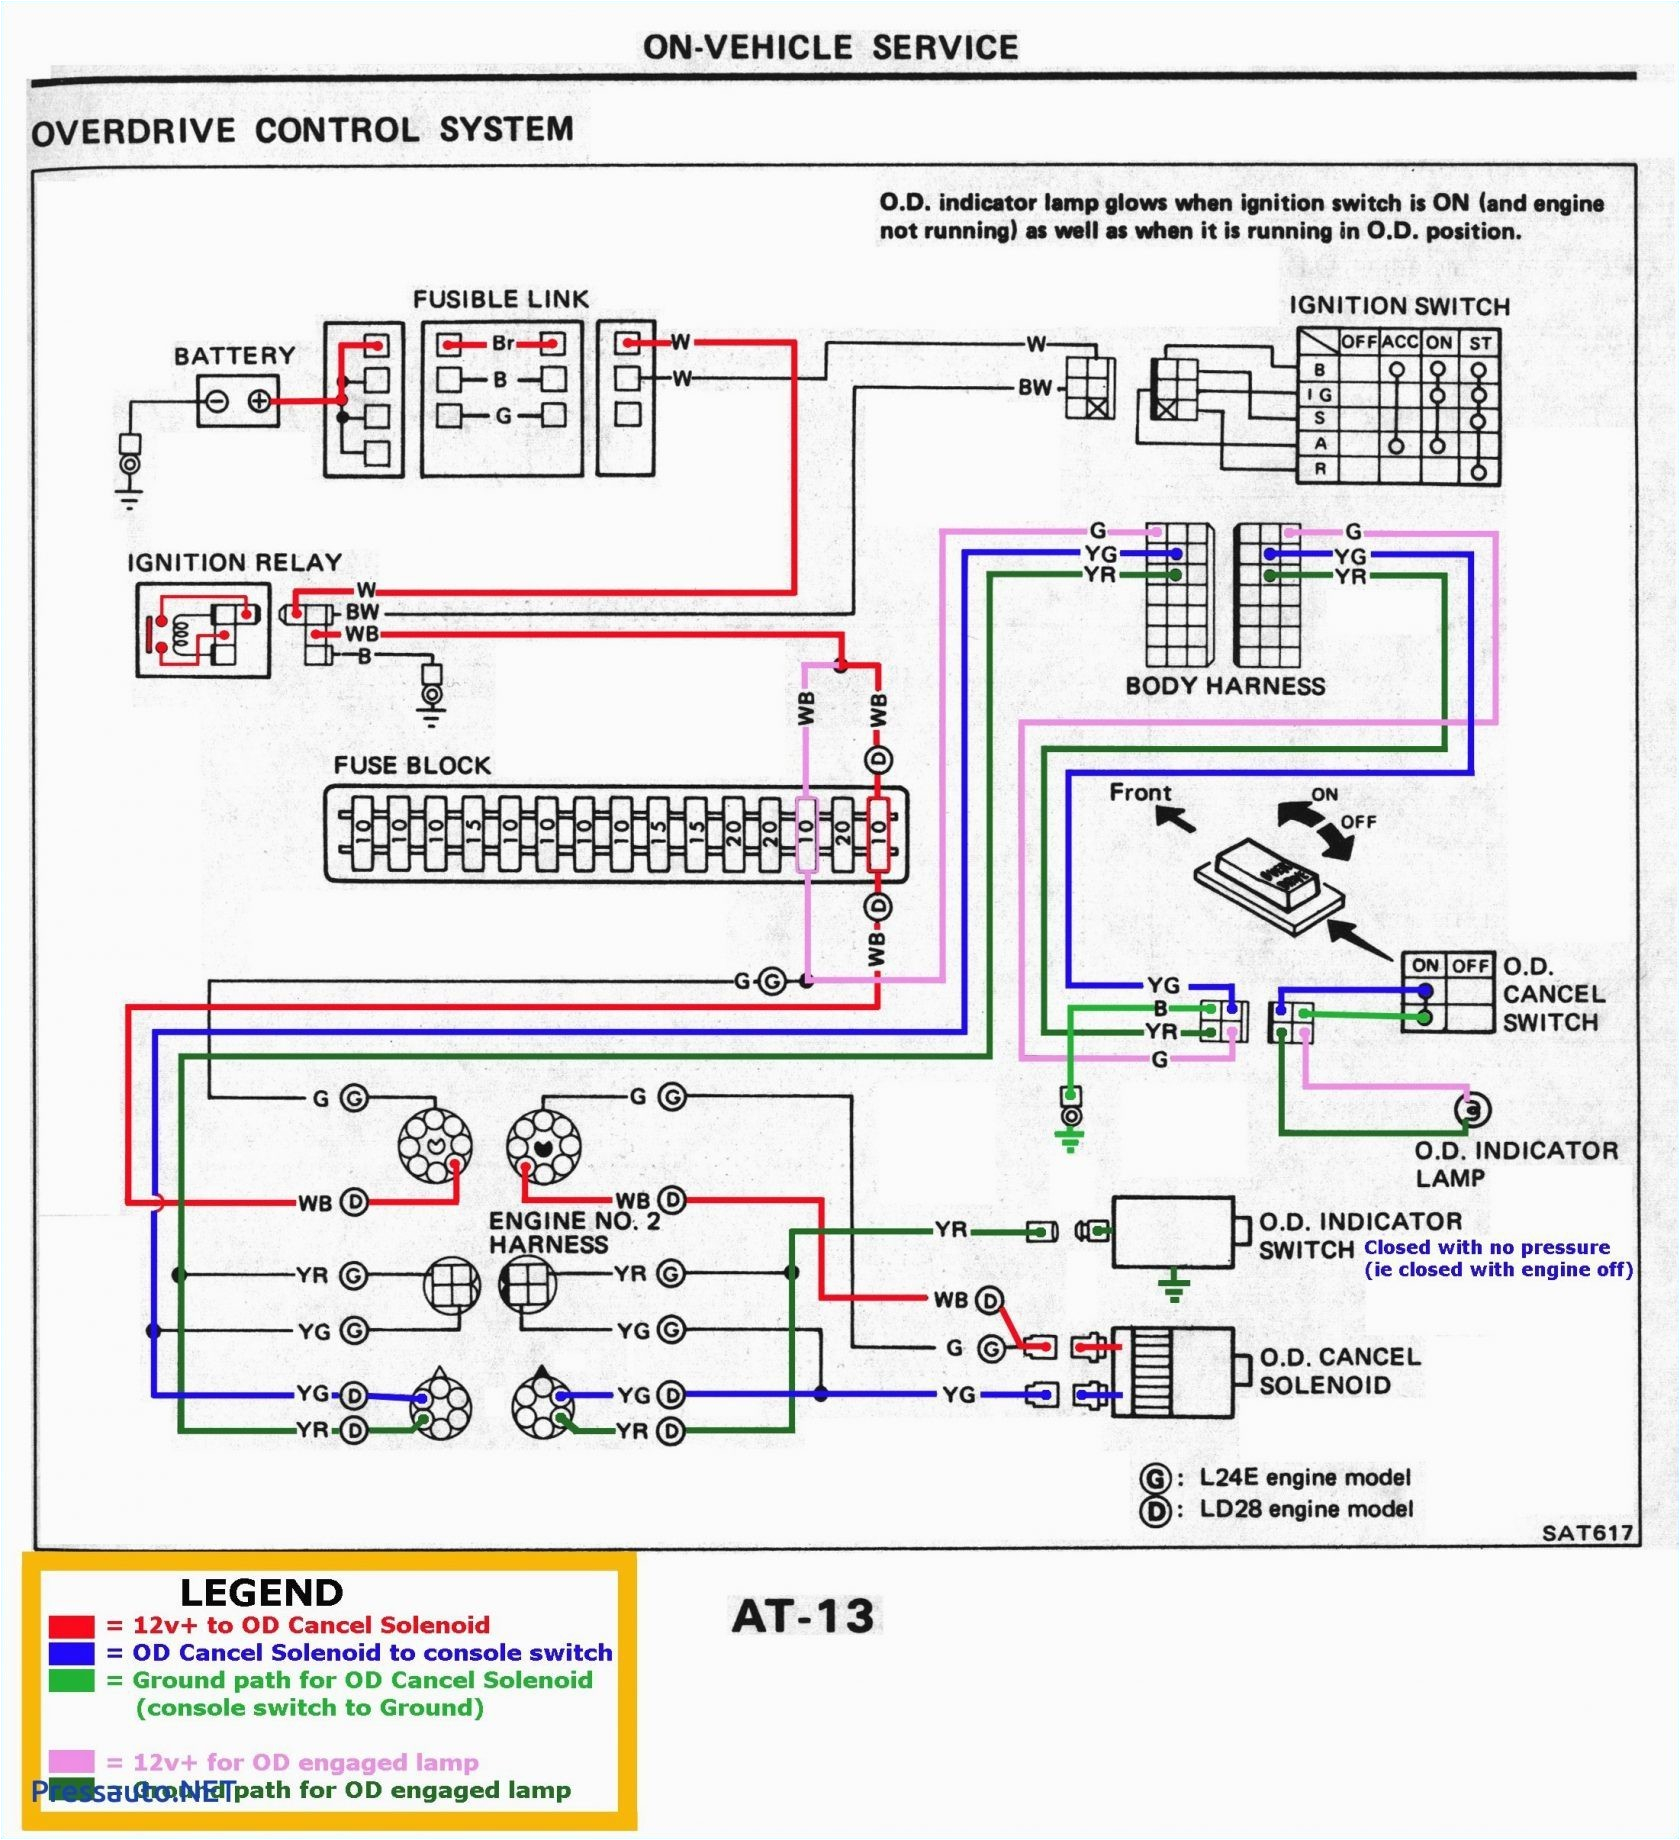 2001 mitsubishi eclipse wiring diagram rate caravan australia valid engine test stand of in network cable